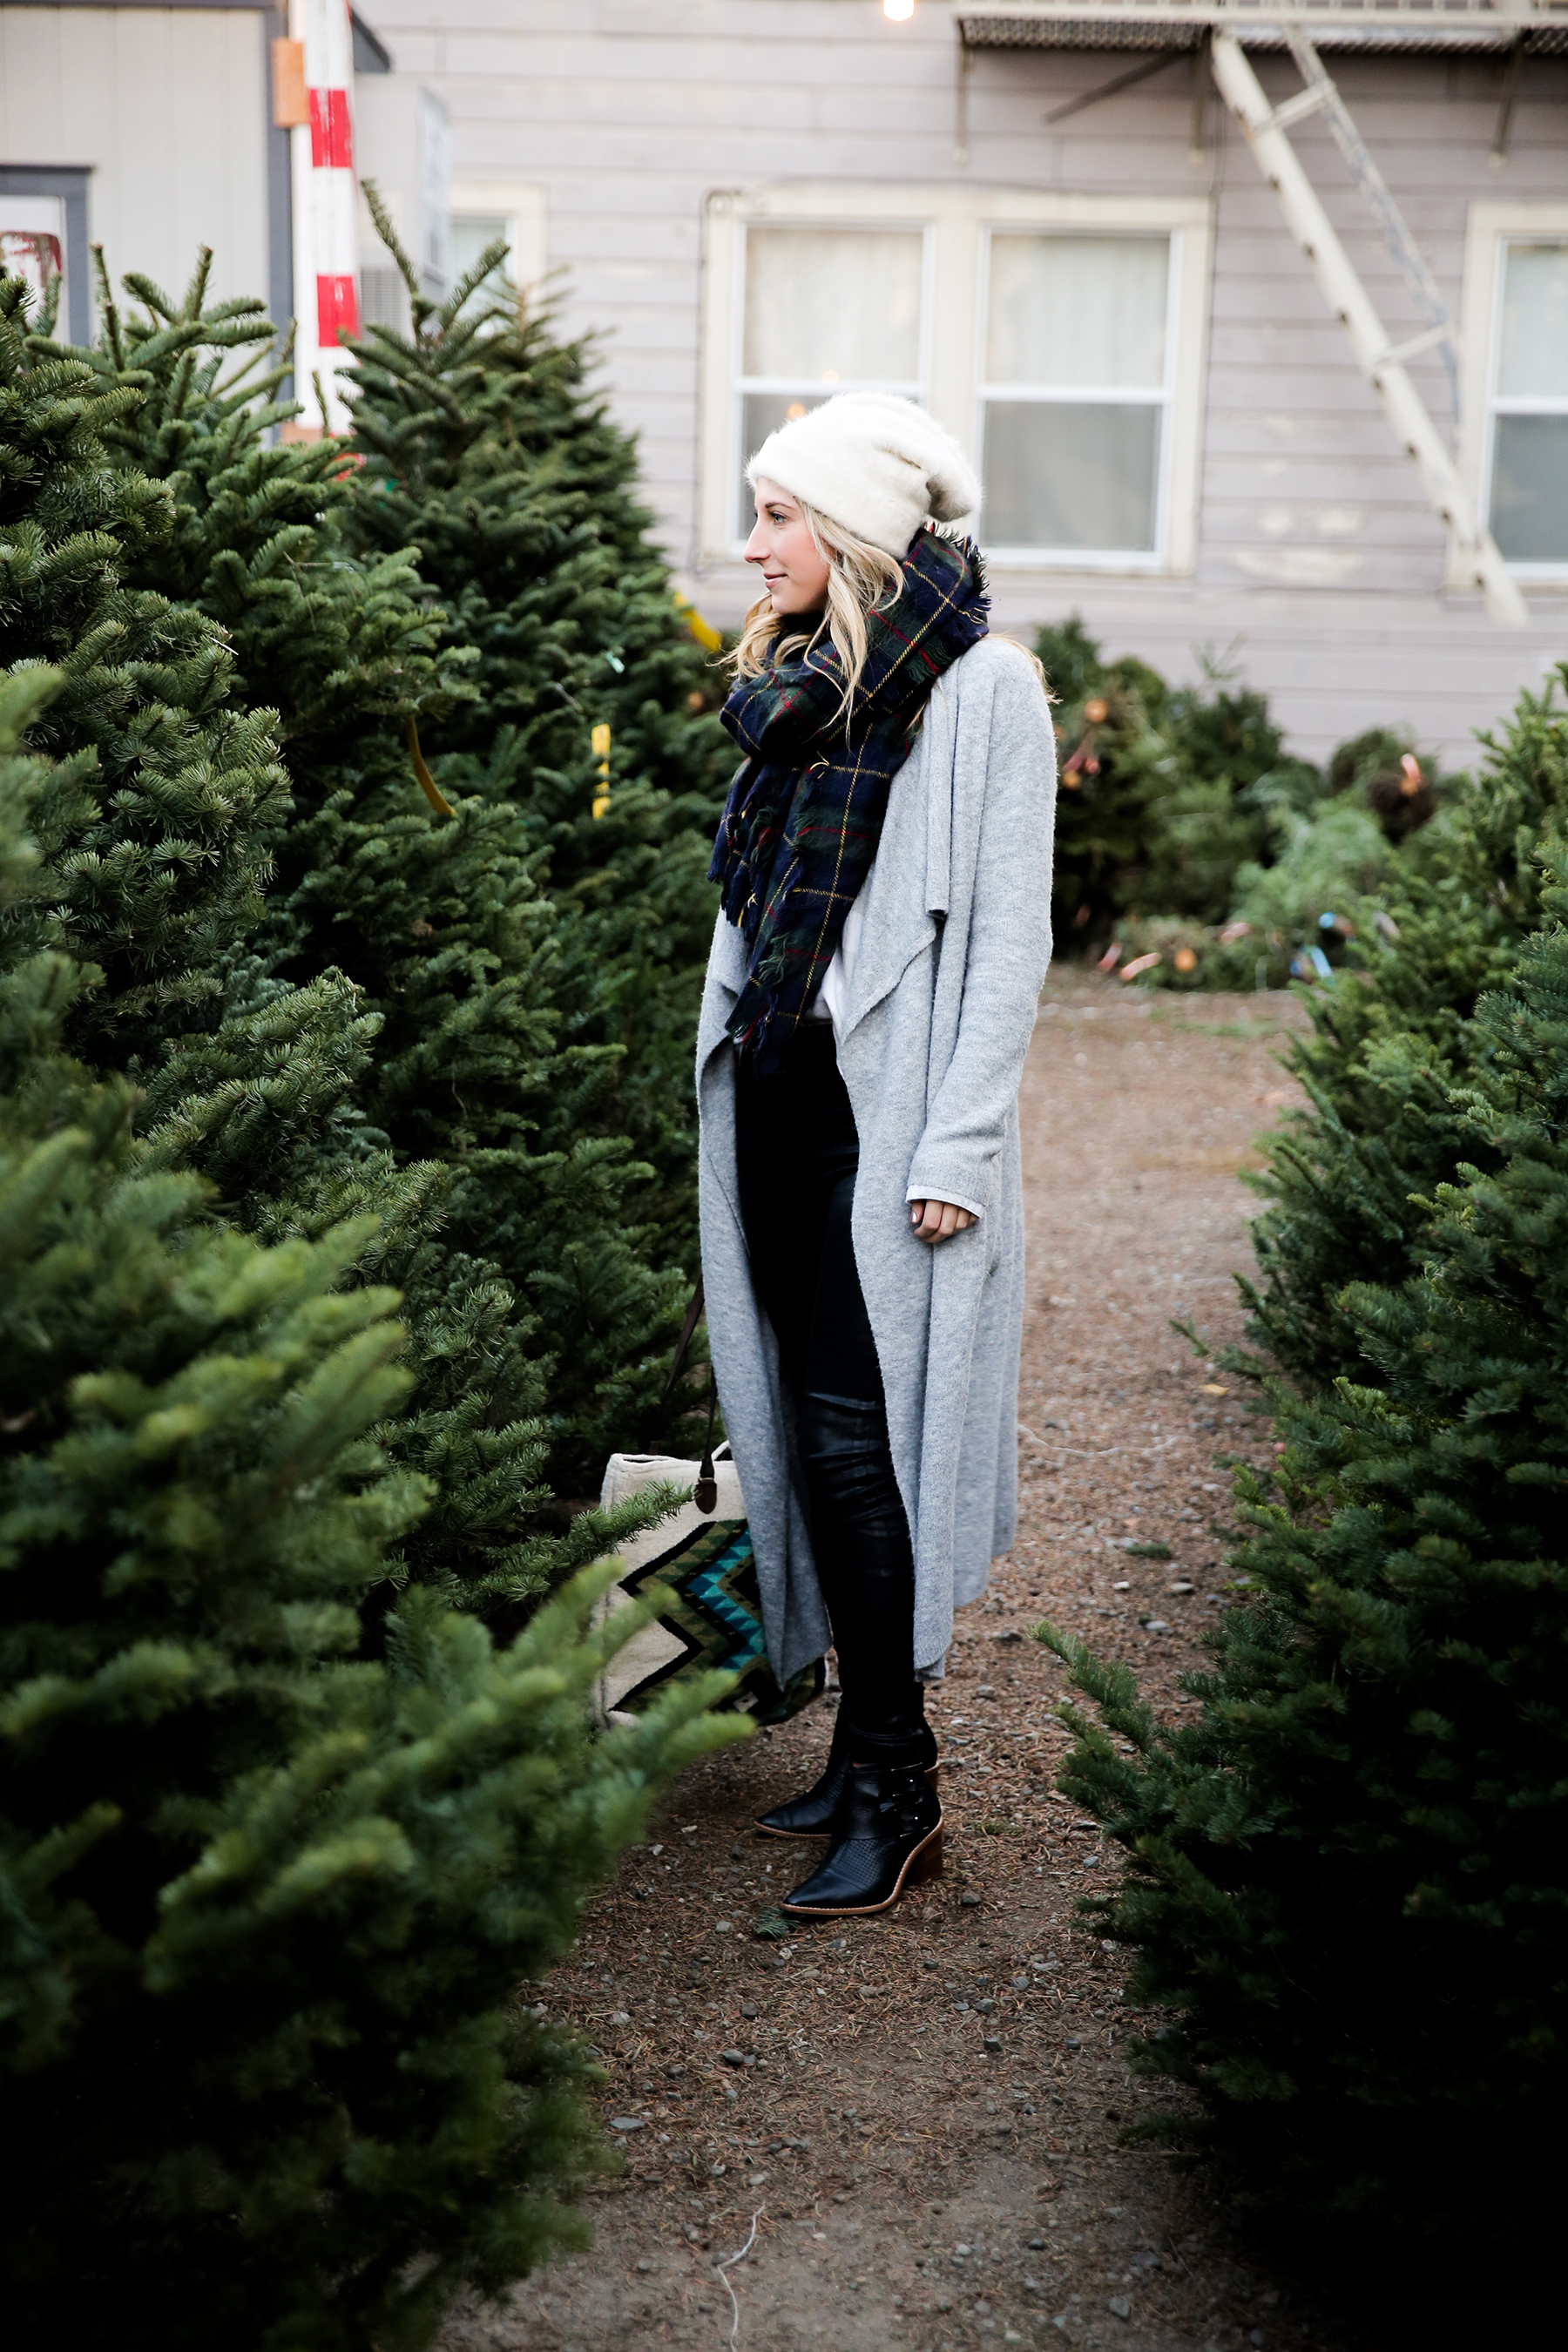 christmas tree lot outfit, holiday outfit, plaid scarf, gray cardigan, holiday outfit ideas, winter outfits, black ankle boots, faux leather pants, photos by Andrea Posadas of Amanda Holstein for Advicefroma20Something.com